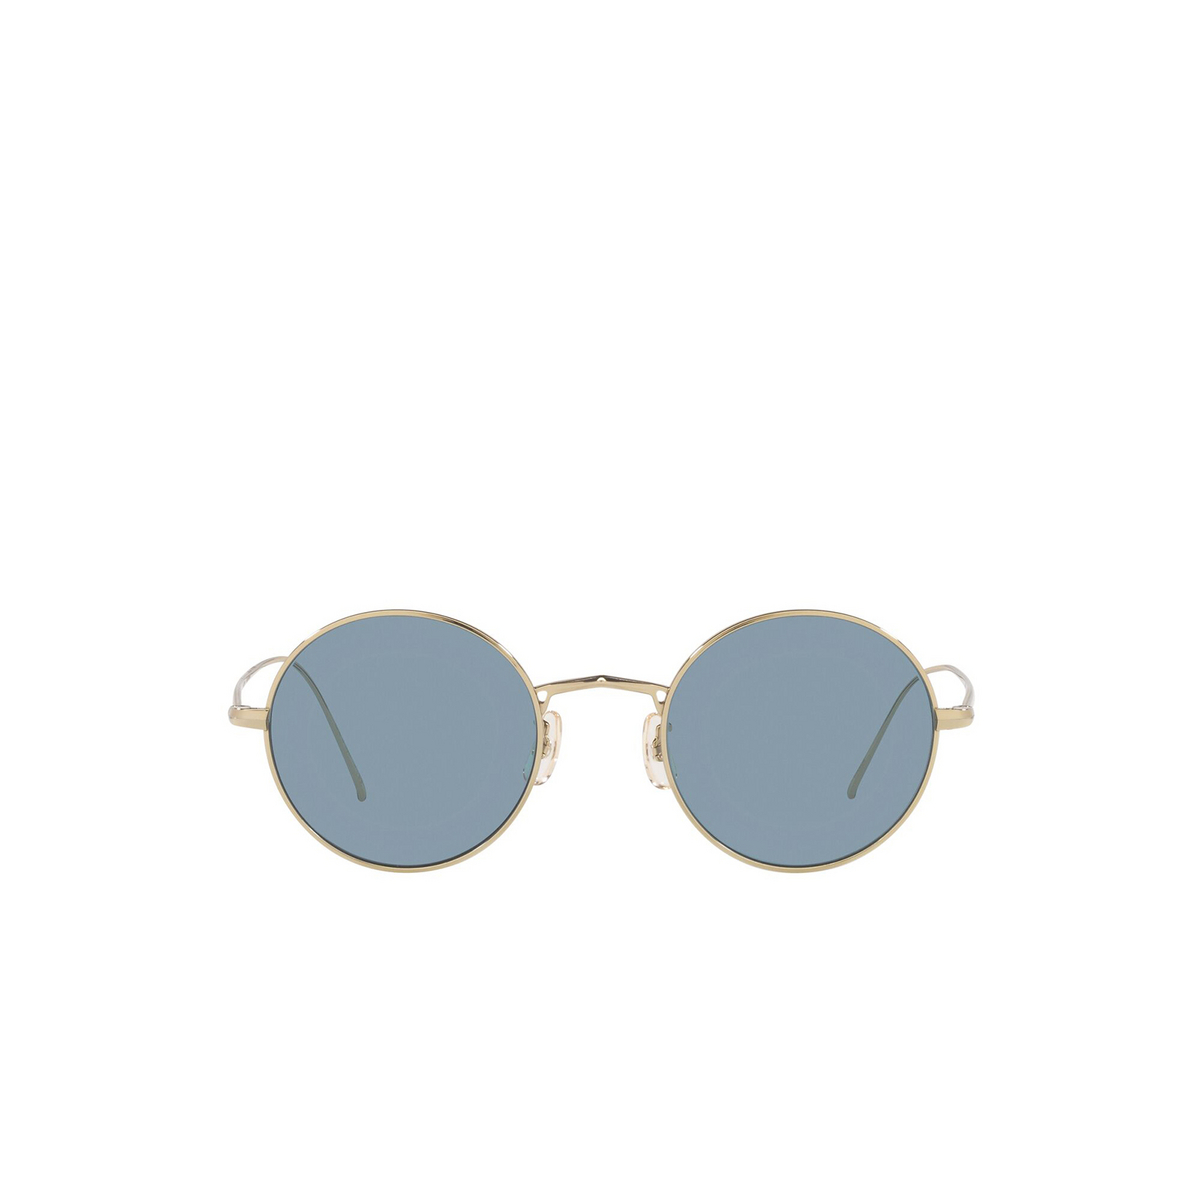 Oliver Peoples G. PONTI-3 Sunglasses 503556 Soft Gold - front view